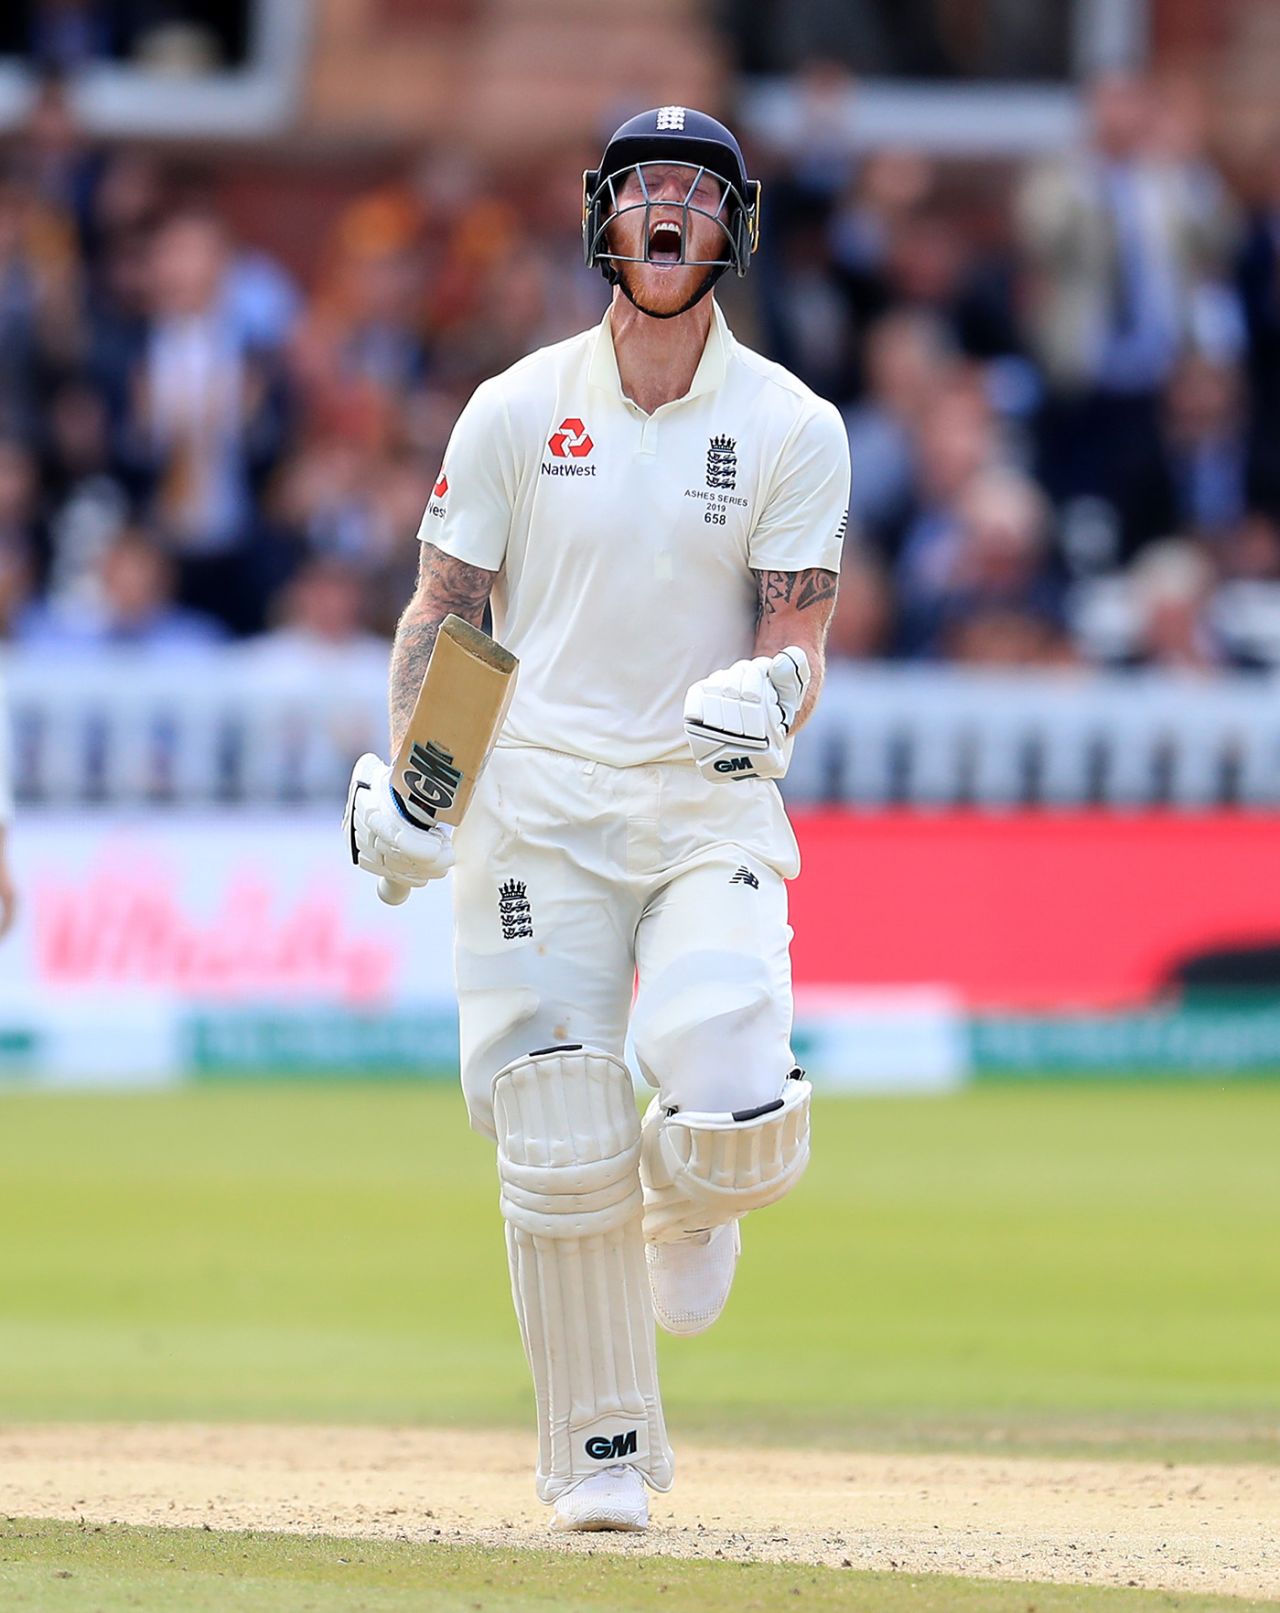 Ben Stokes roars as he goes through to his hundred, England v Australia, 2nd Test, Lord's, 5th day, August 18, 2019